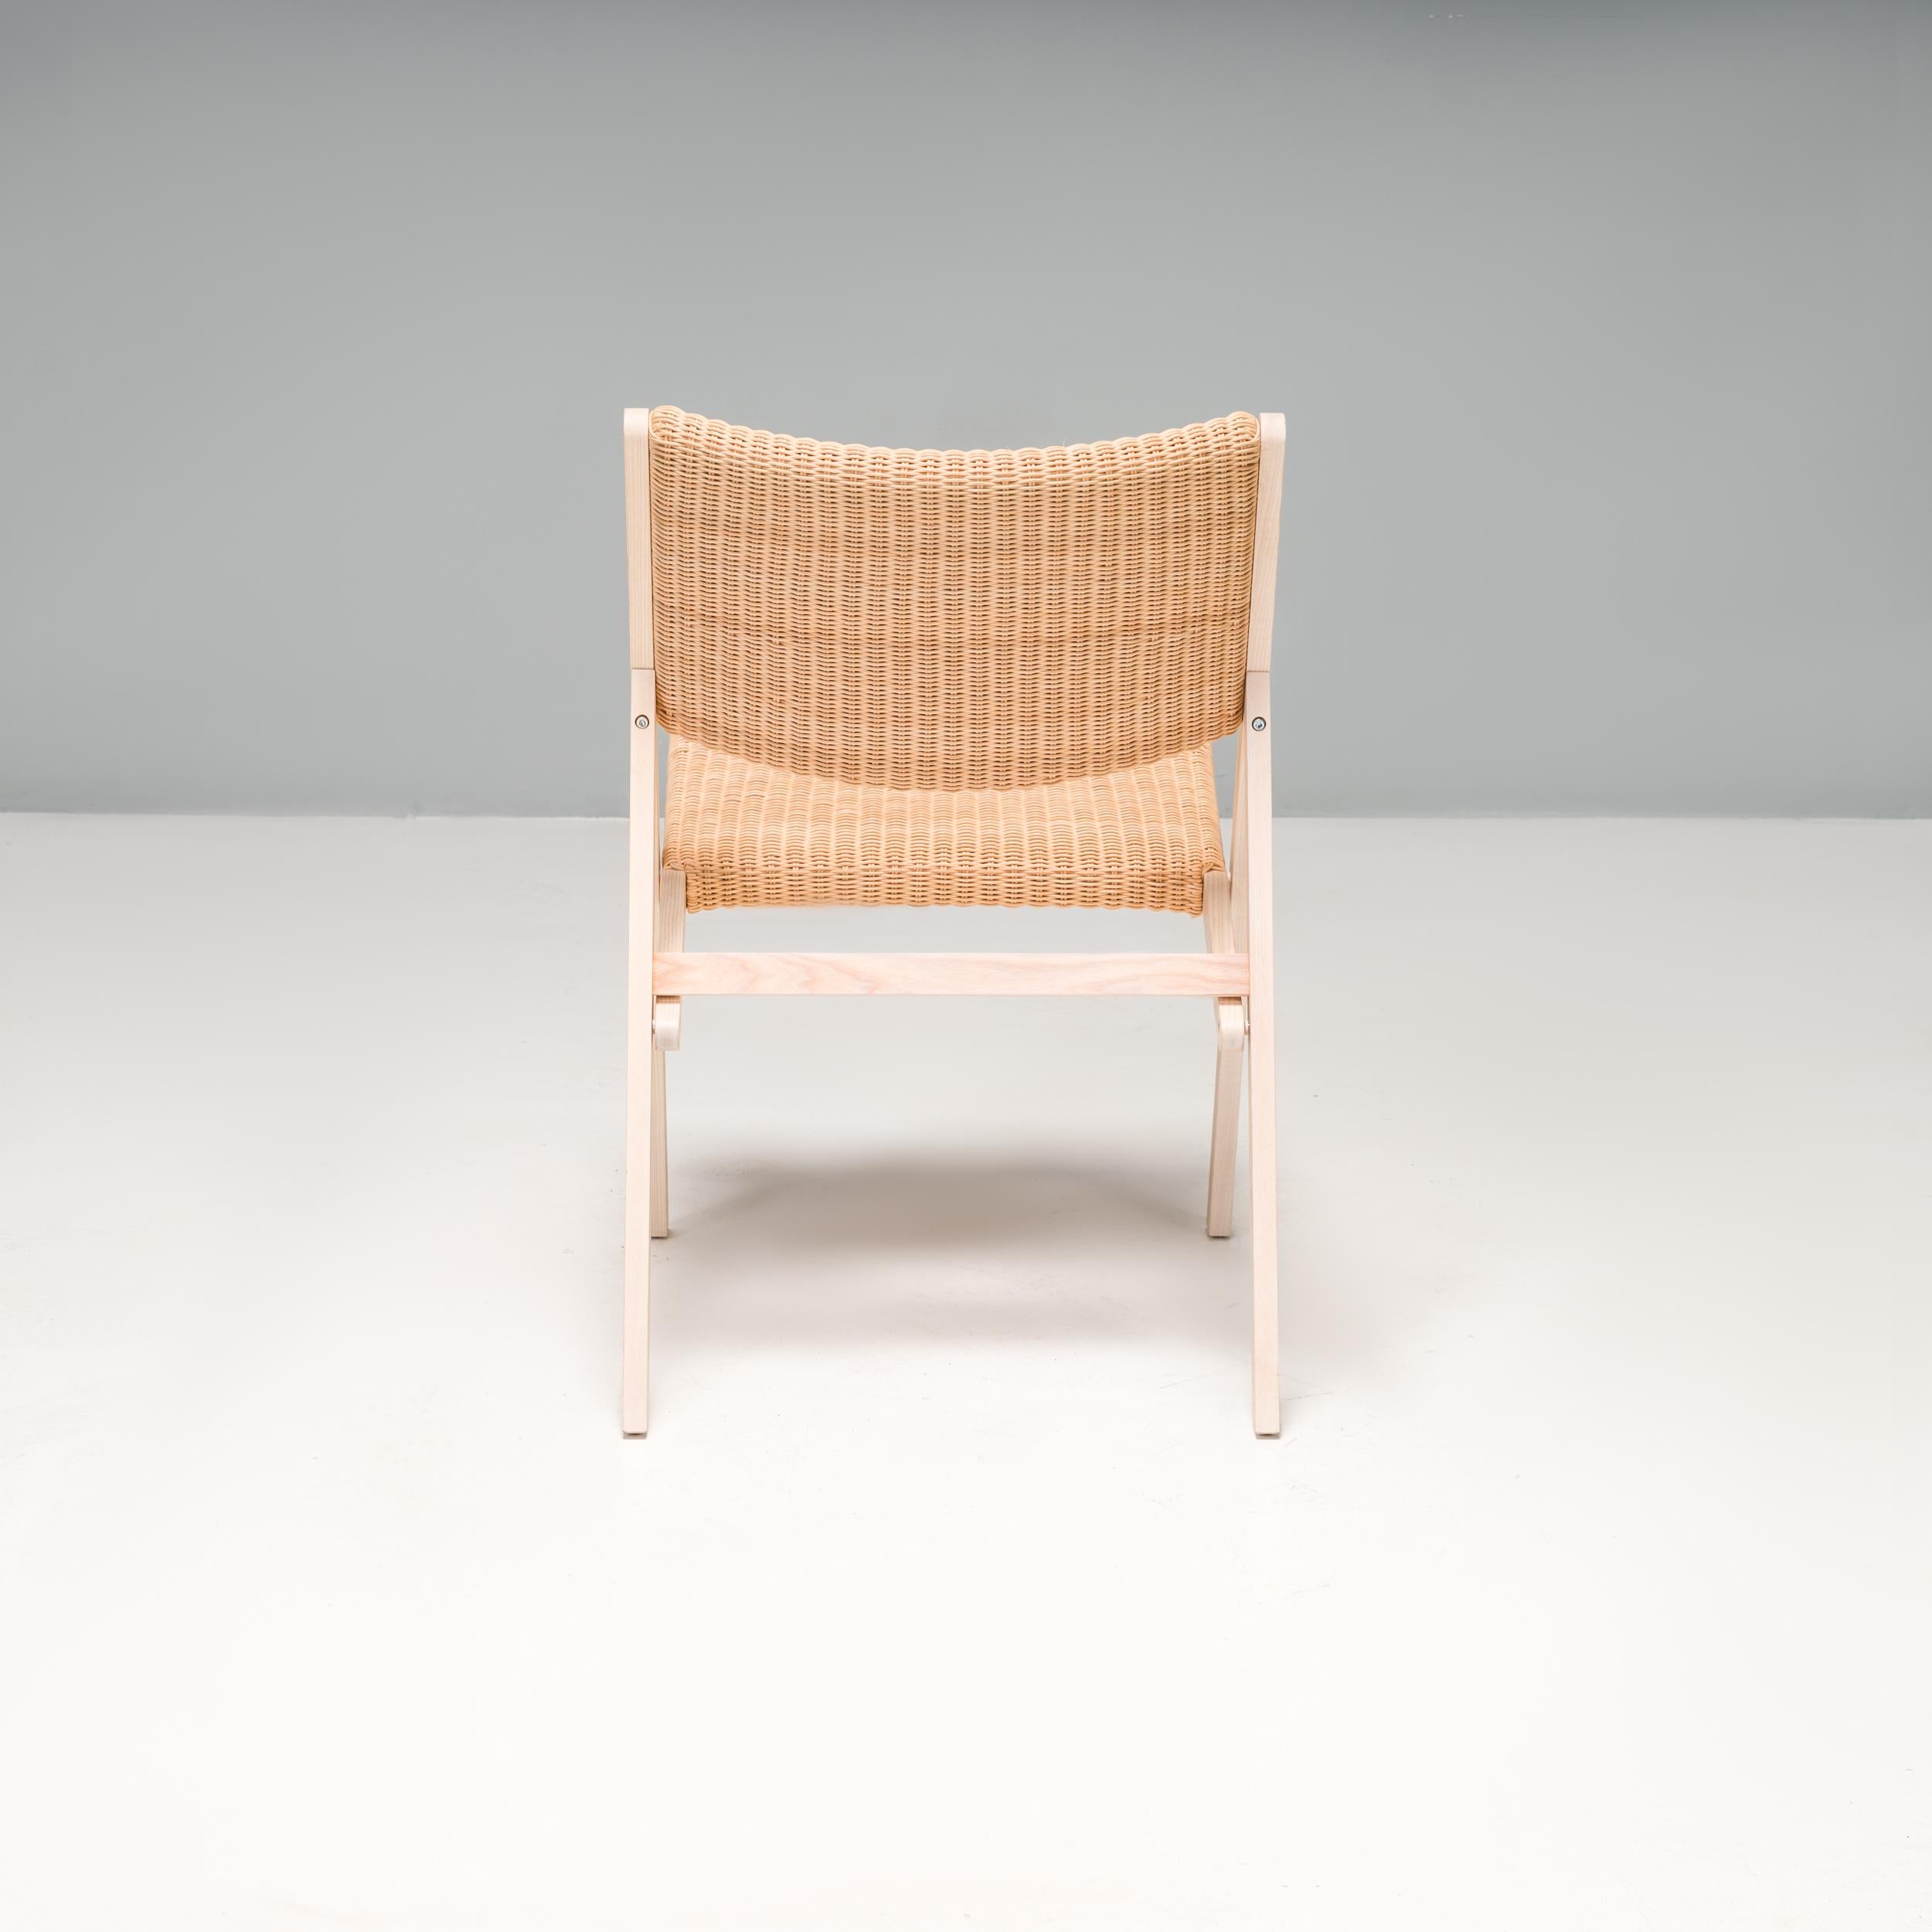 Gio Ponti for Molteni&C D.270.1 Wicker Folding Chairs, Set of 2 For Sale 3